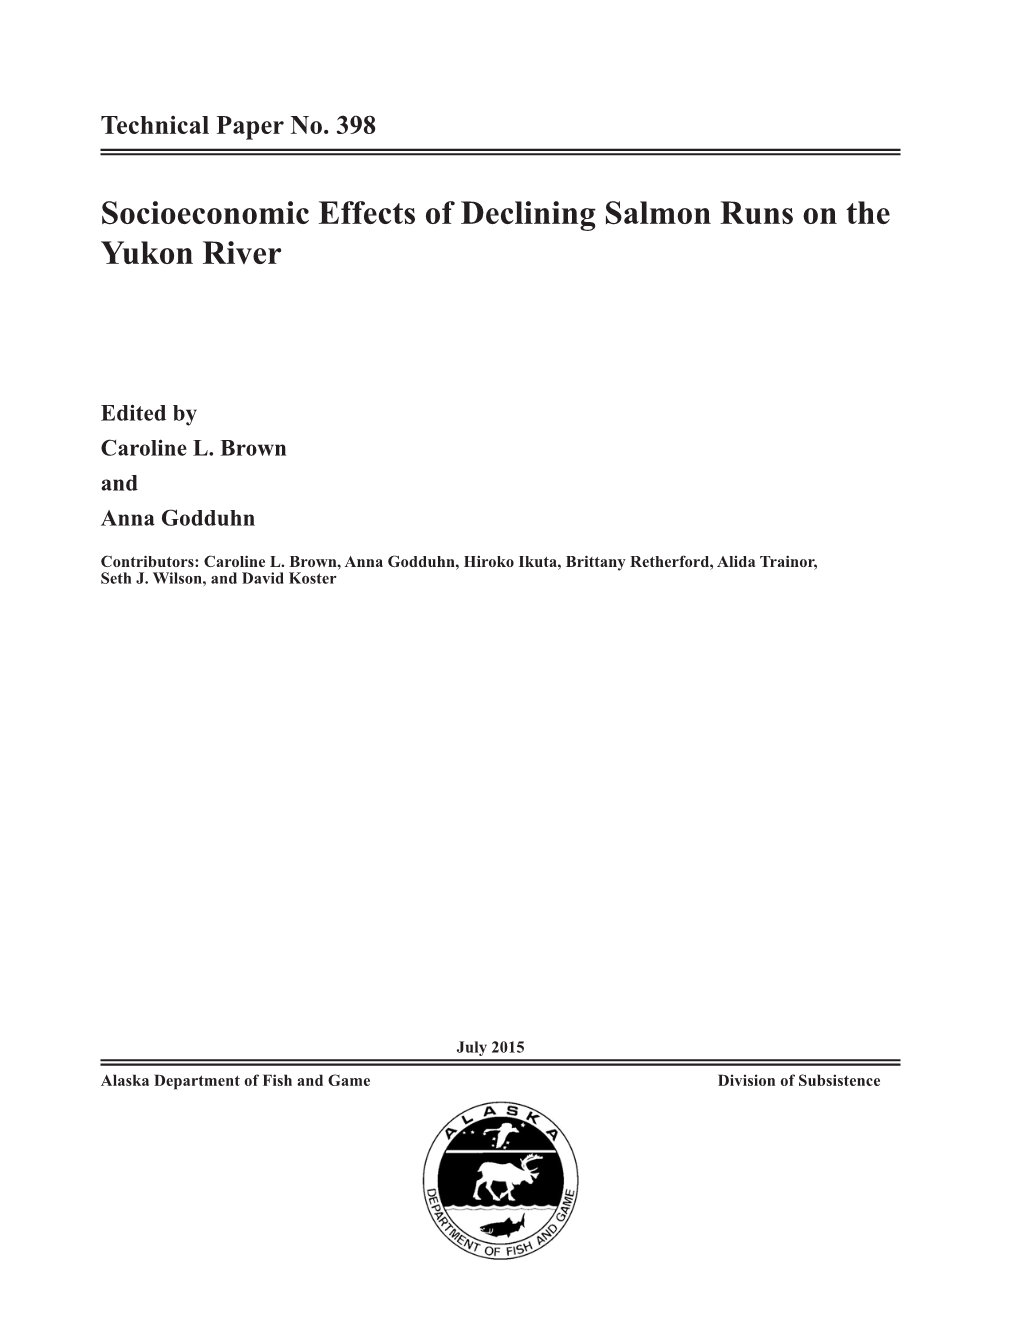 Technical Paper No. 398 Socioeconomic Effects of Declining